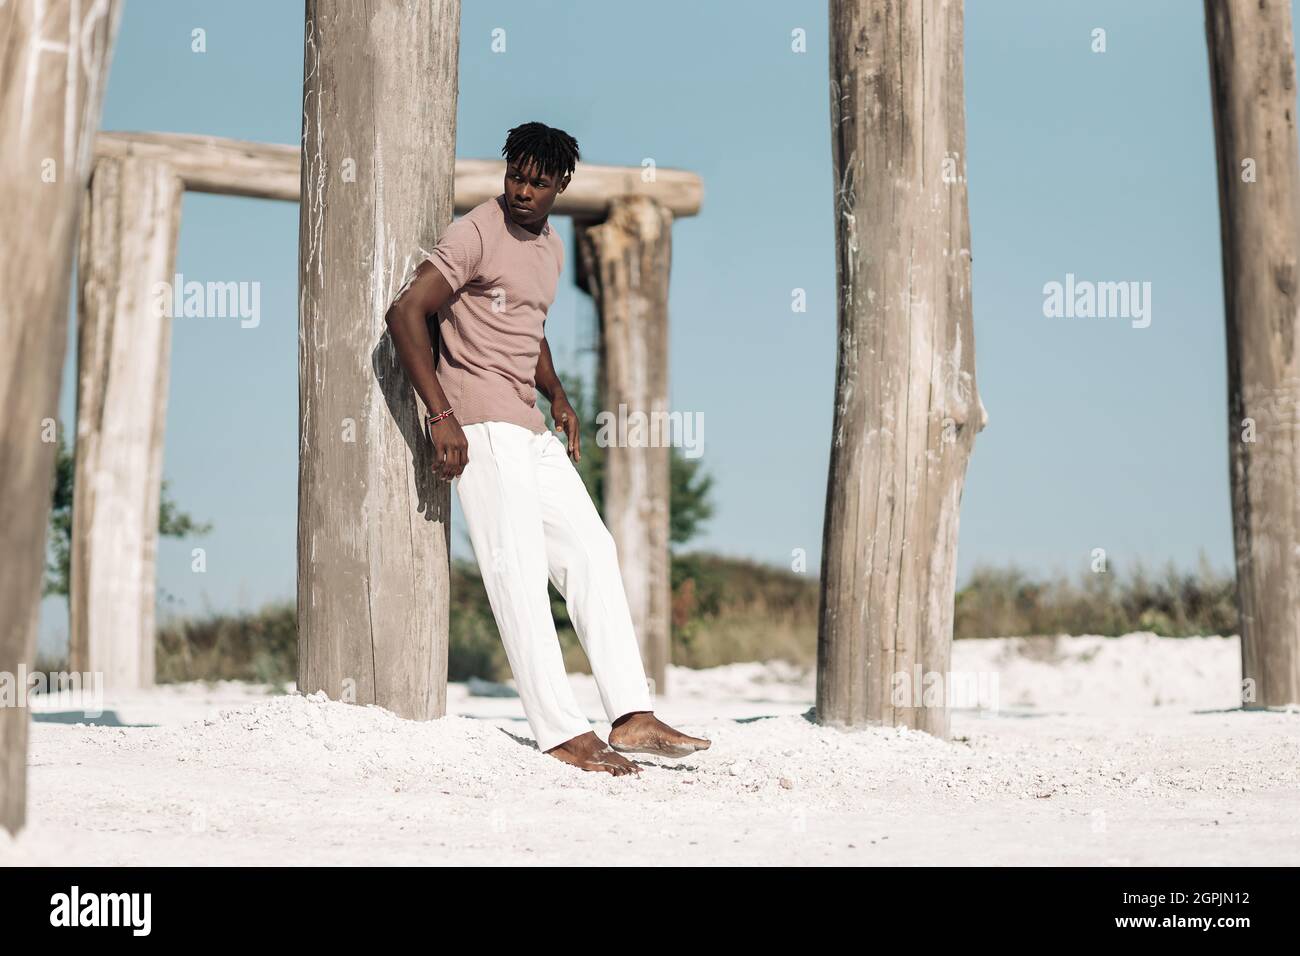 Handsome stylish black curly man, man wearing stylish clothes, posing in dry desert, Wild west style, fashion model Stock Photo